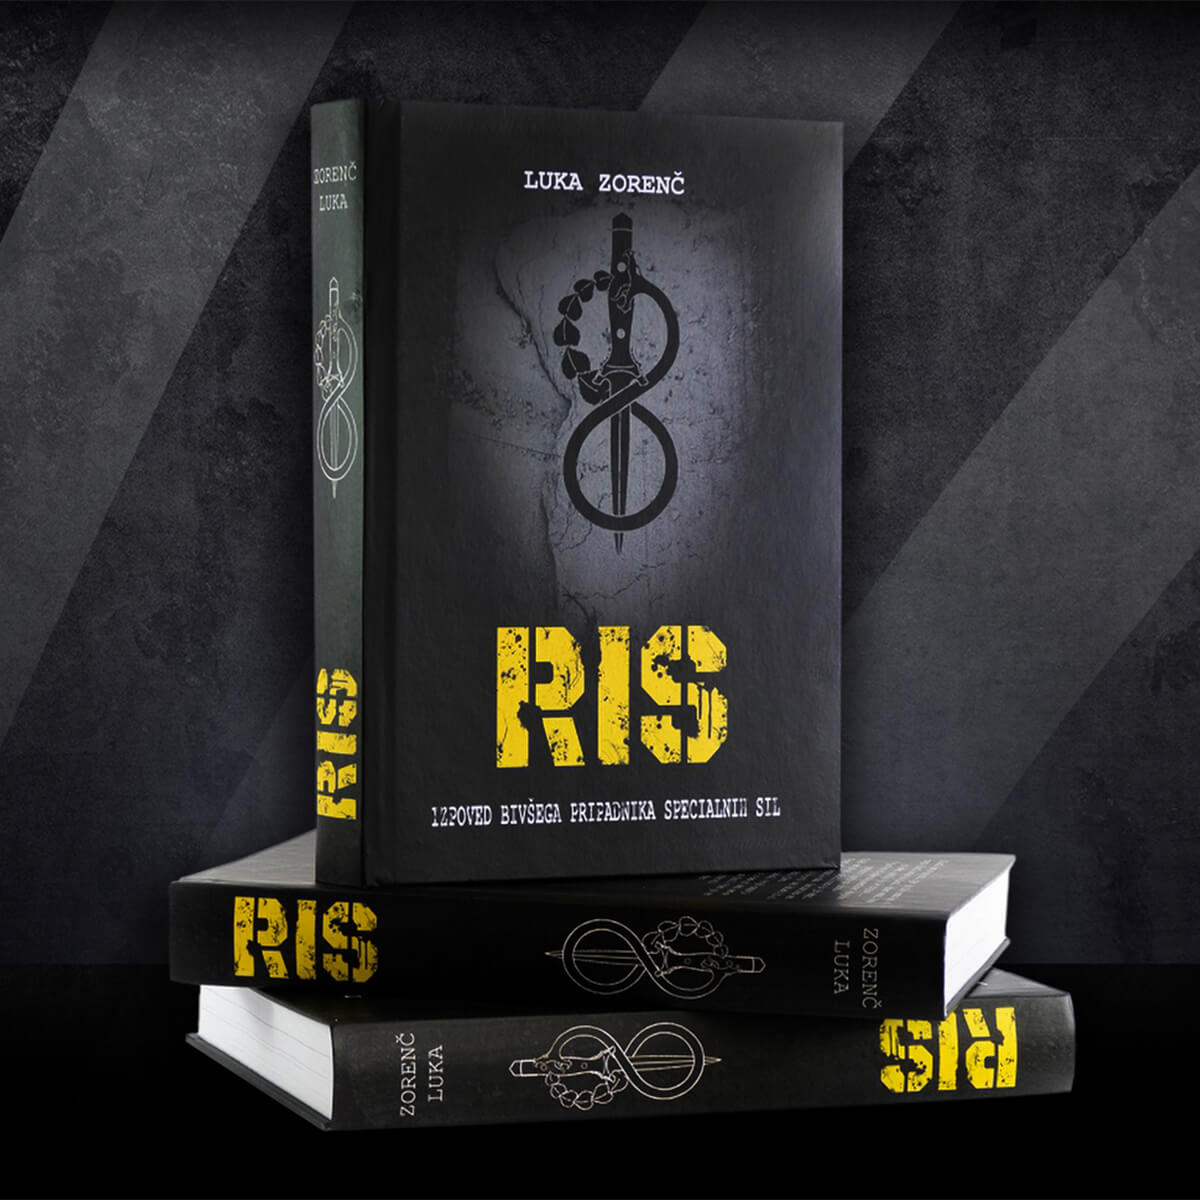 Ris book from Luka Zorenc